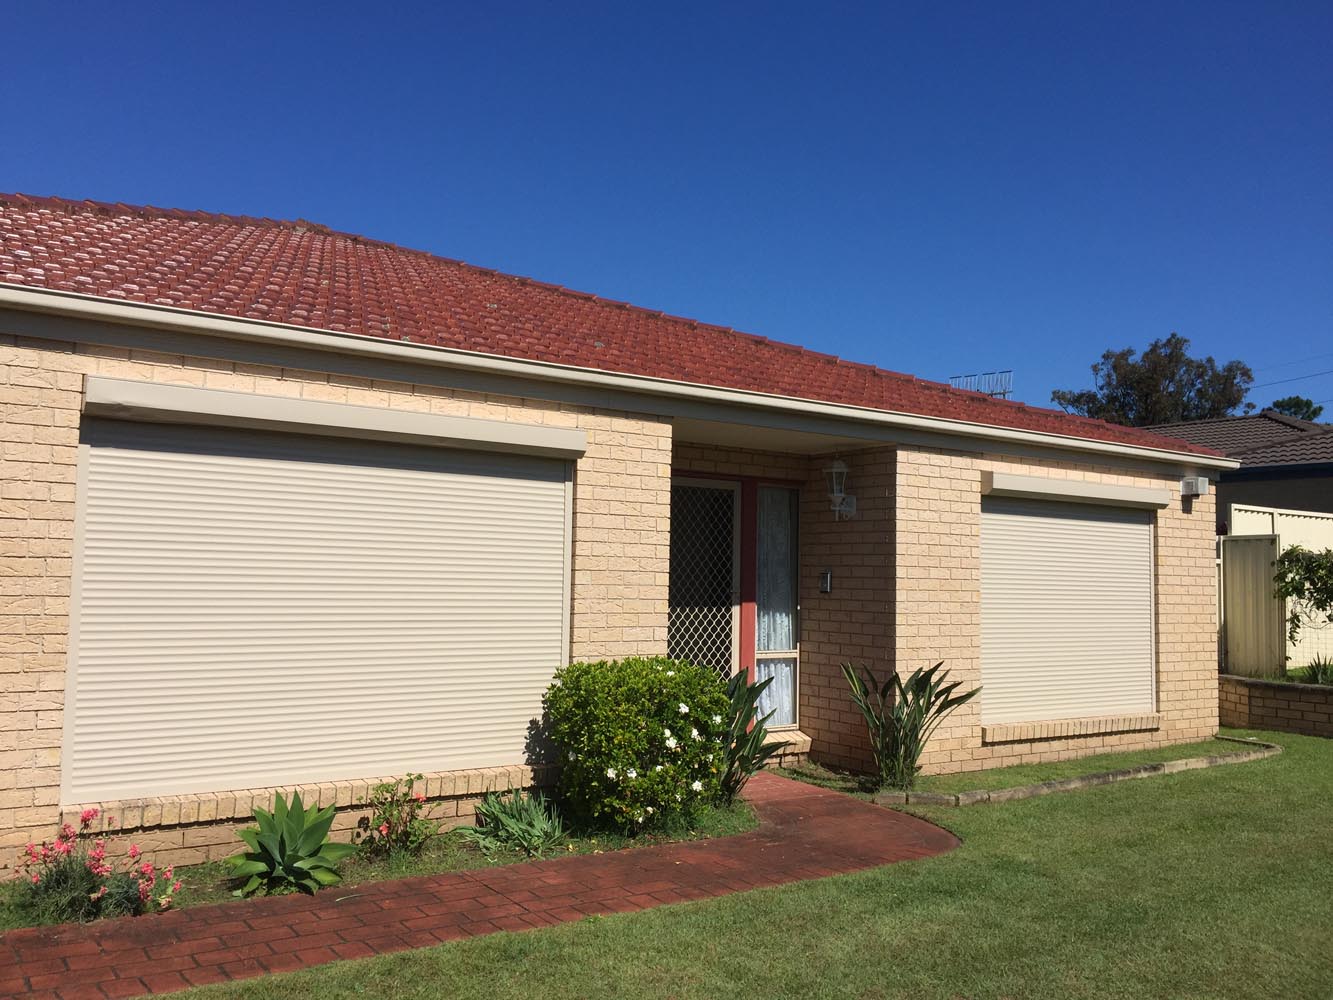 All District Roller Shutters - Domestic & Commercial Roller Shutters Sydney